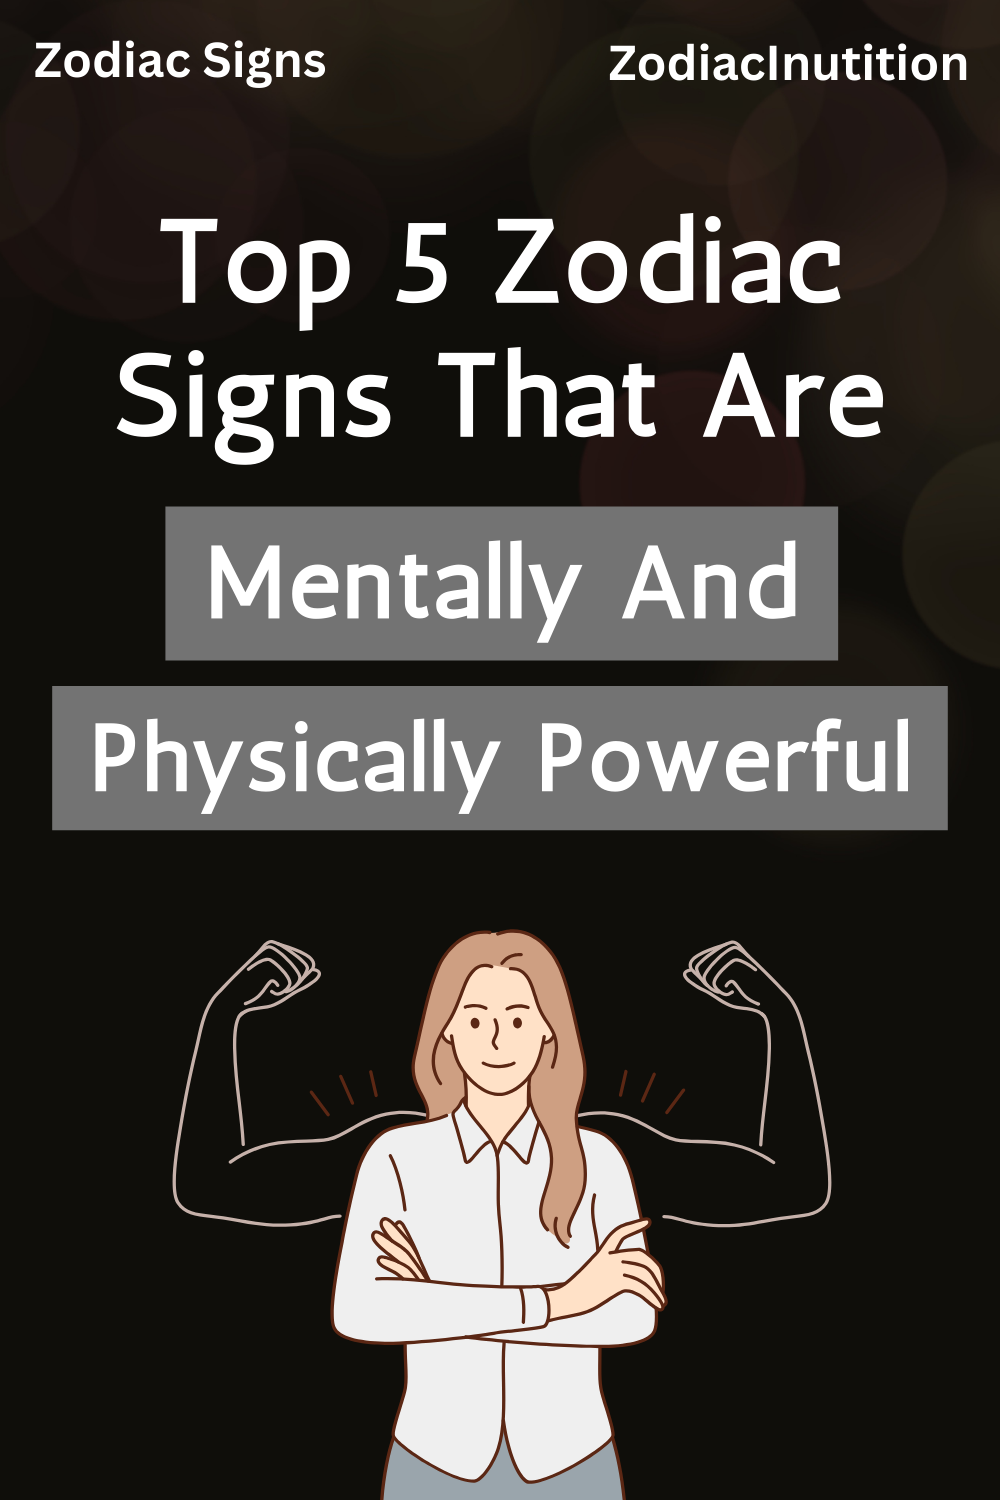 Top 5 Zodiac Signs That Are Mentally And Physically Powerful